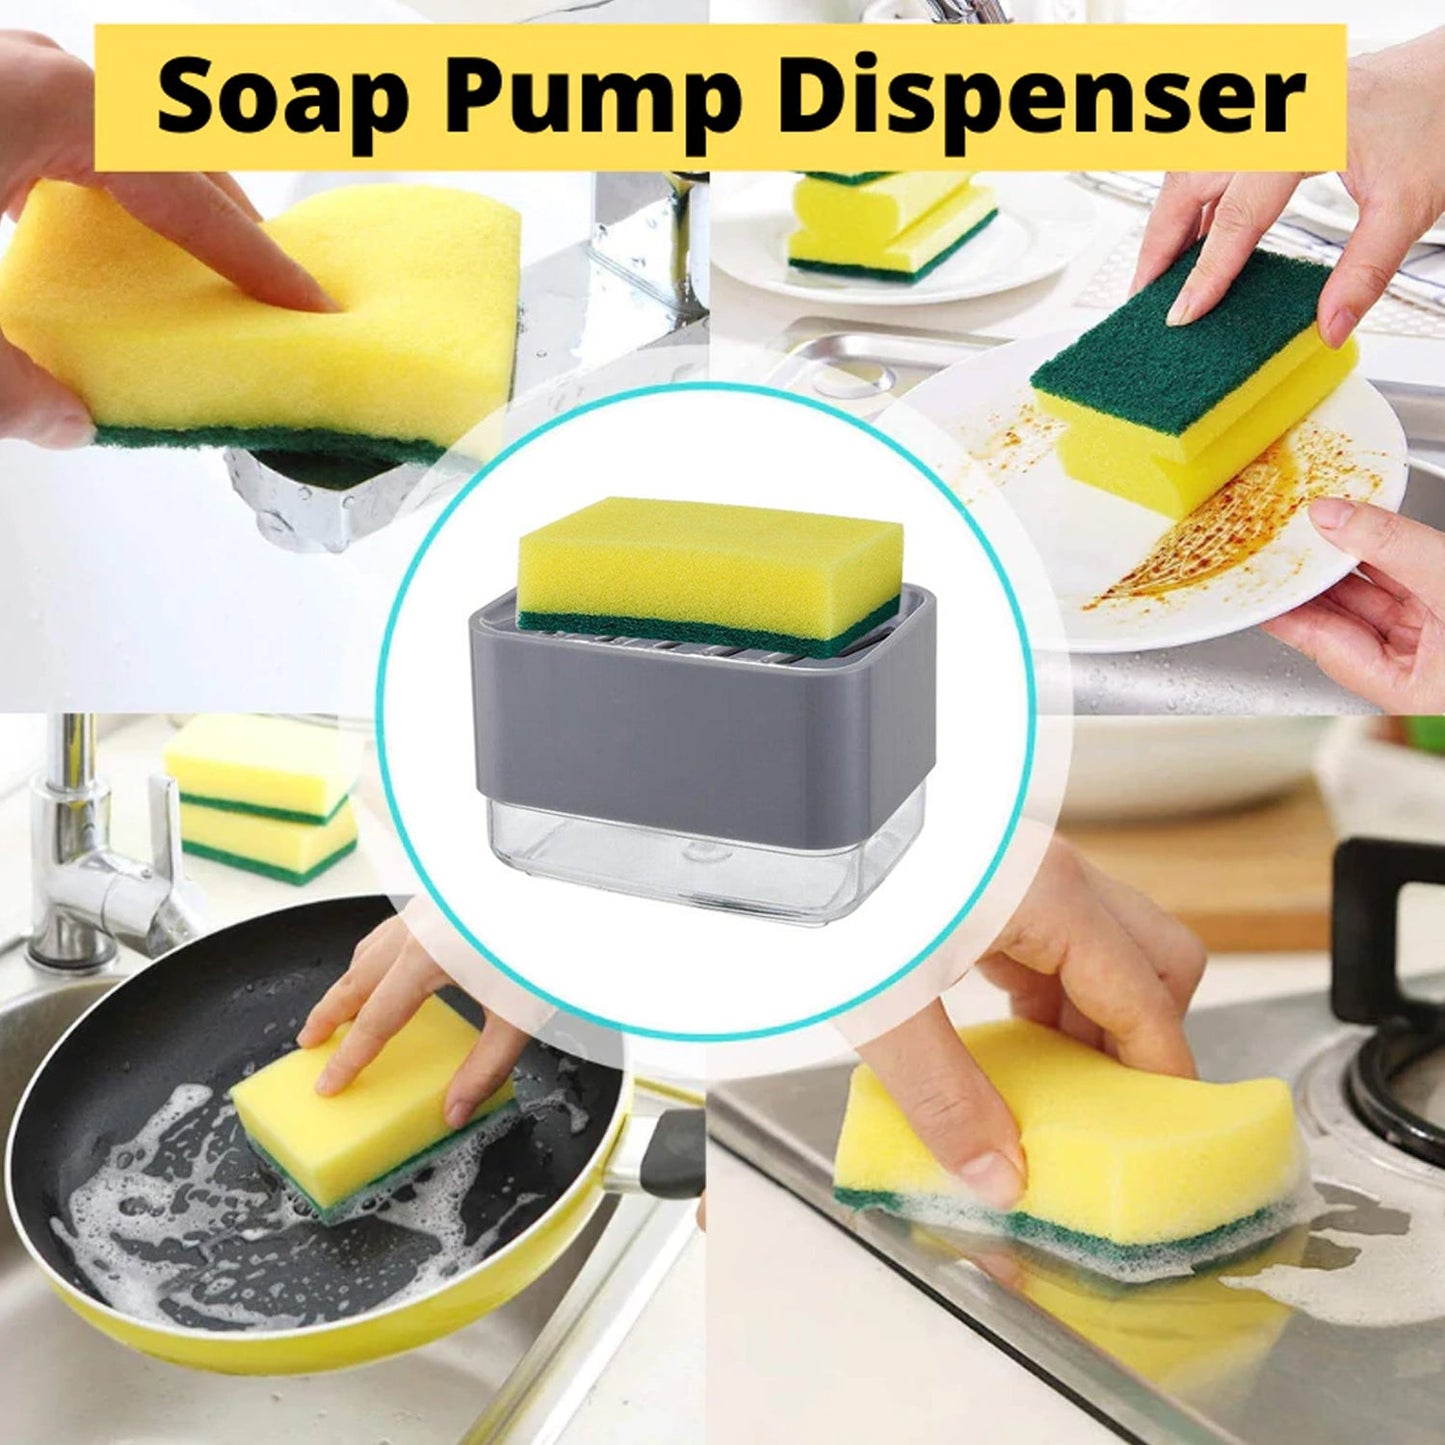 2 in 1 Soap Dispenser Used As A Soap Holder In Bathrooms And Toilets.